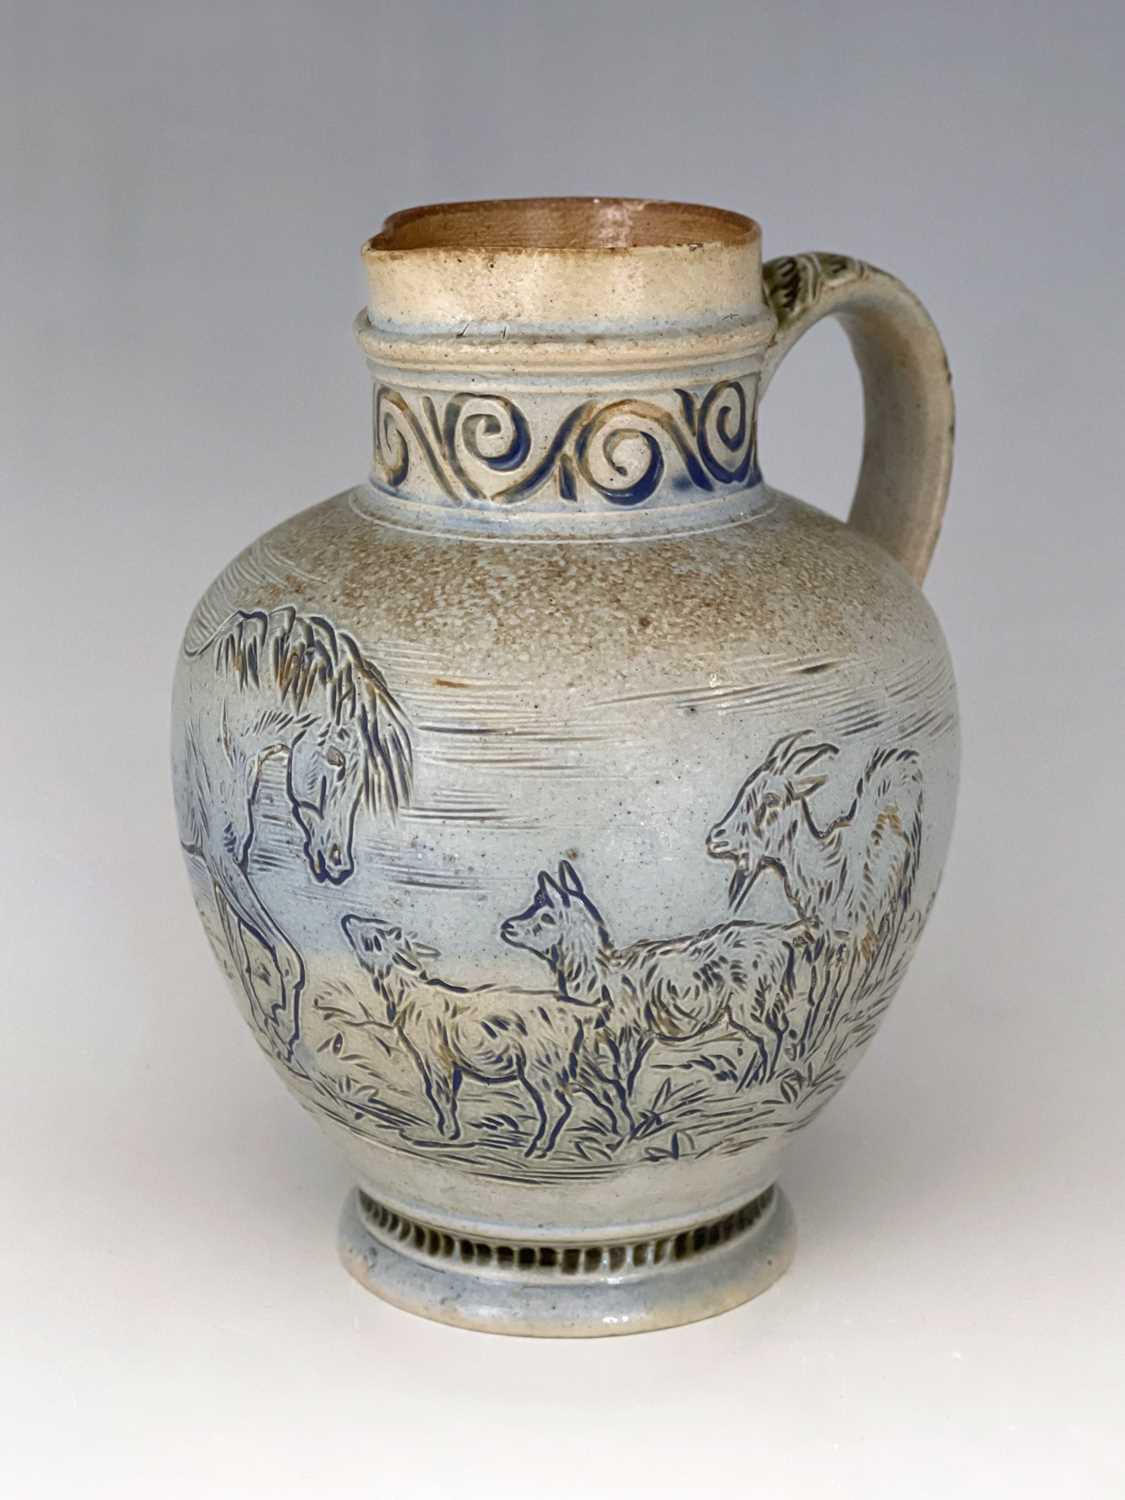 Hannah Barlow for Doulton Lambeth, a stoneware jug, 1874, shouldered ovoid form, sgraffito decorated - Image 7 of 9